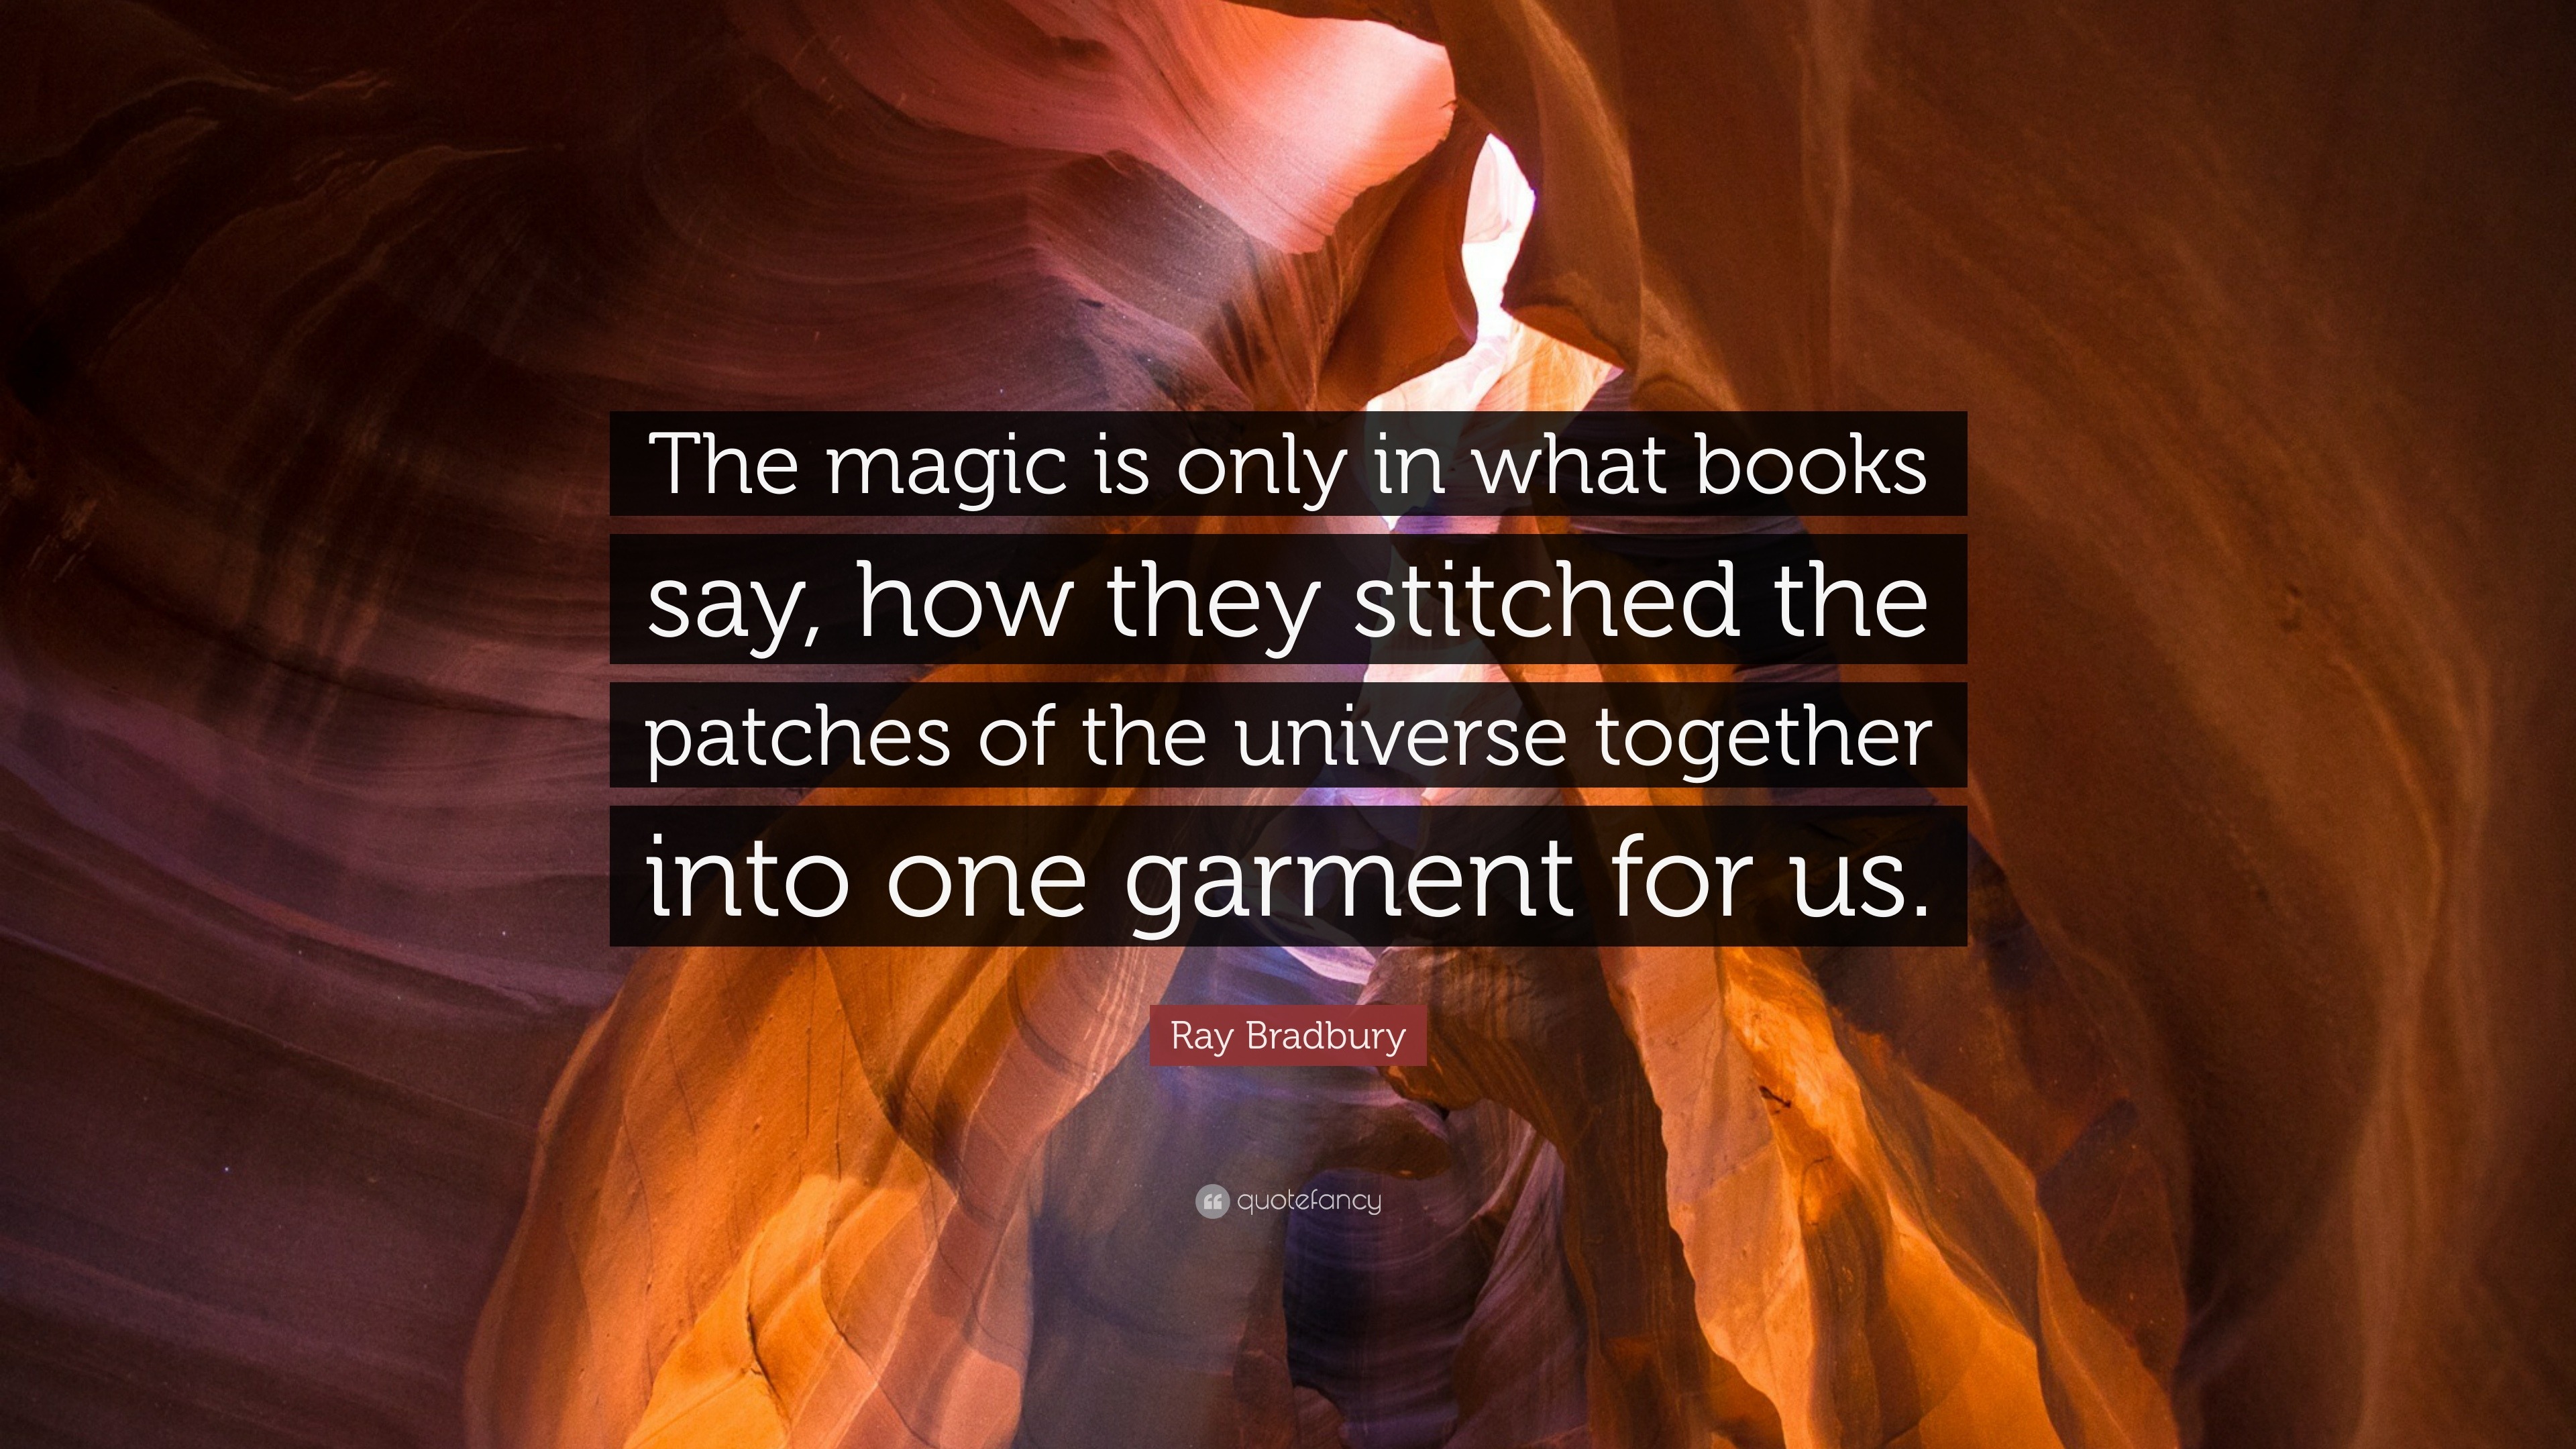 Ray Bradbury Quote: “The magic is only in what books say, how they